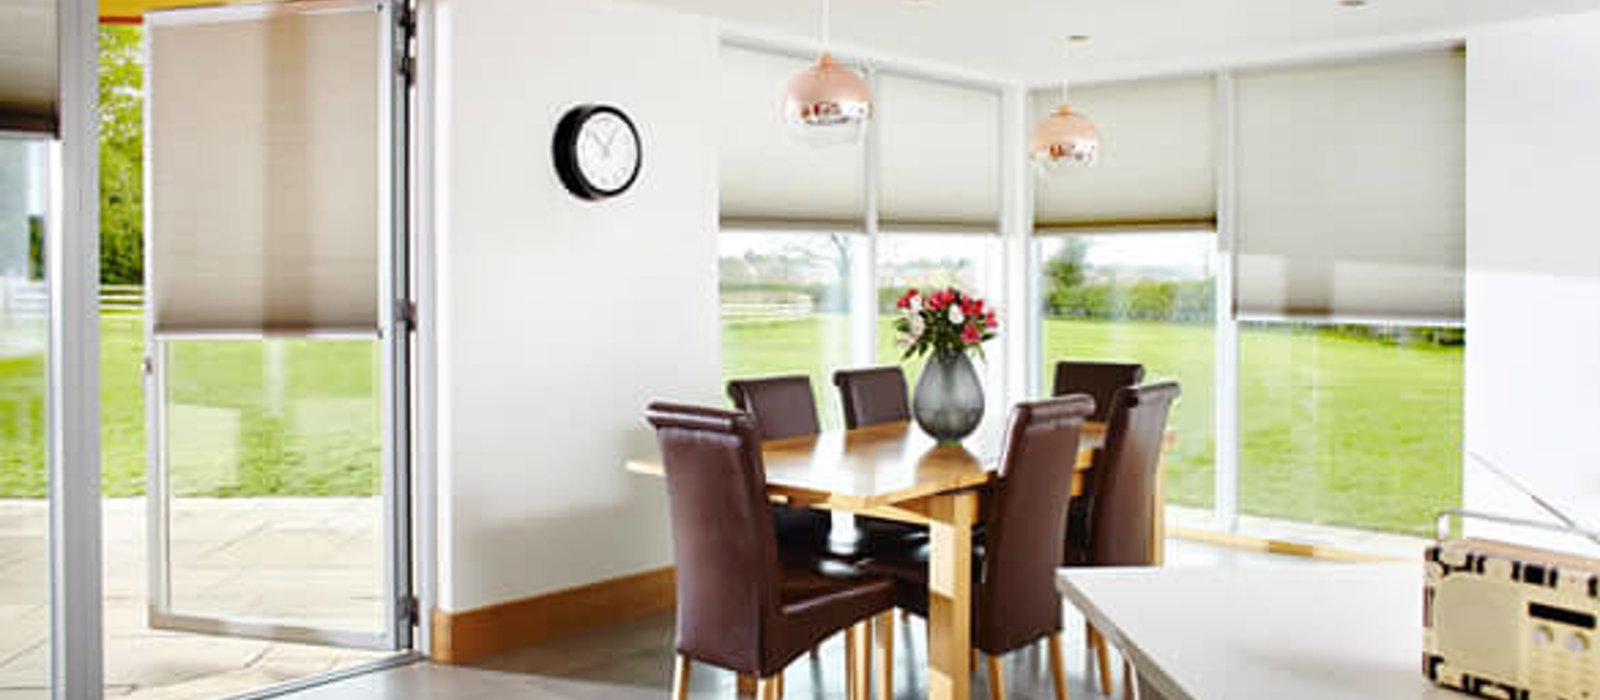 Dining area with large windows looking out to the garden fitted with Duette energy saving blinds